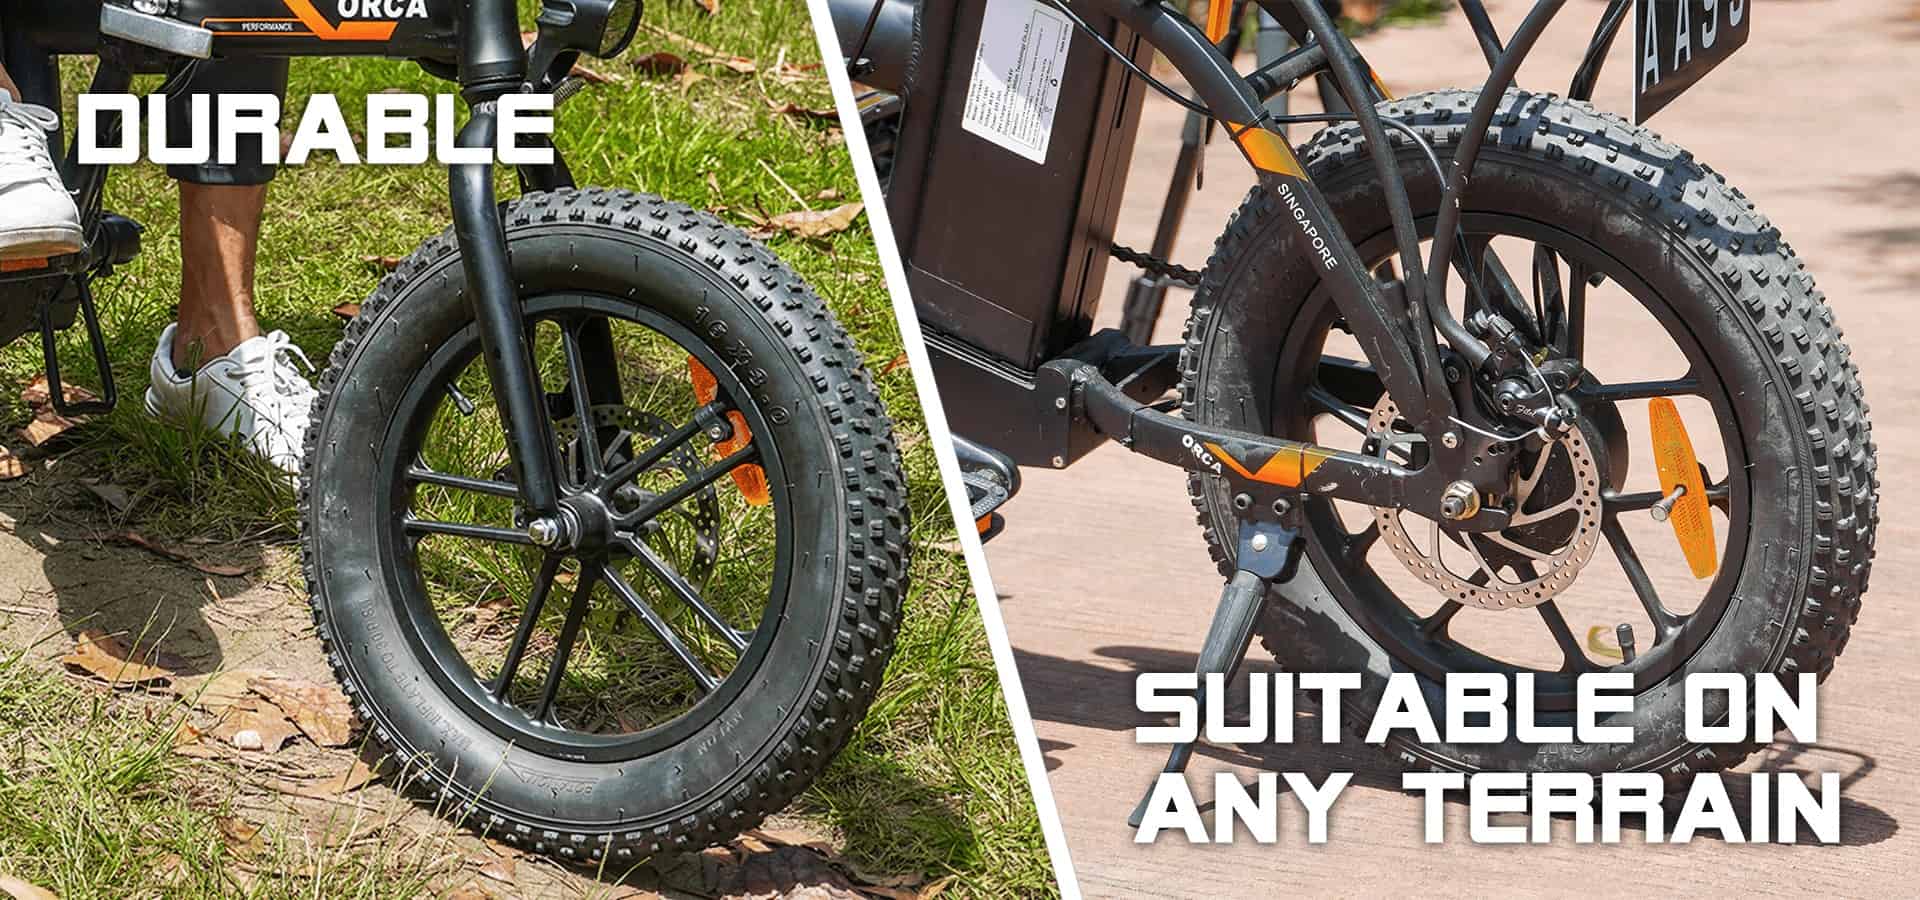 ExtraContent_ORCA LTA approved fat tyre ebike_4 V1